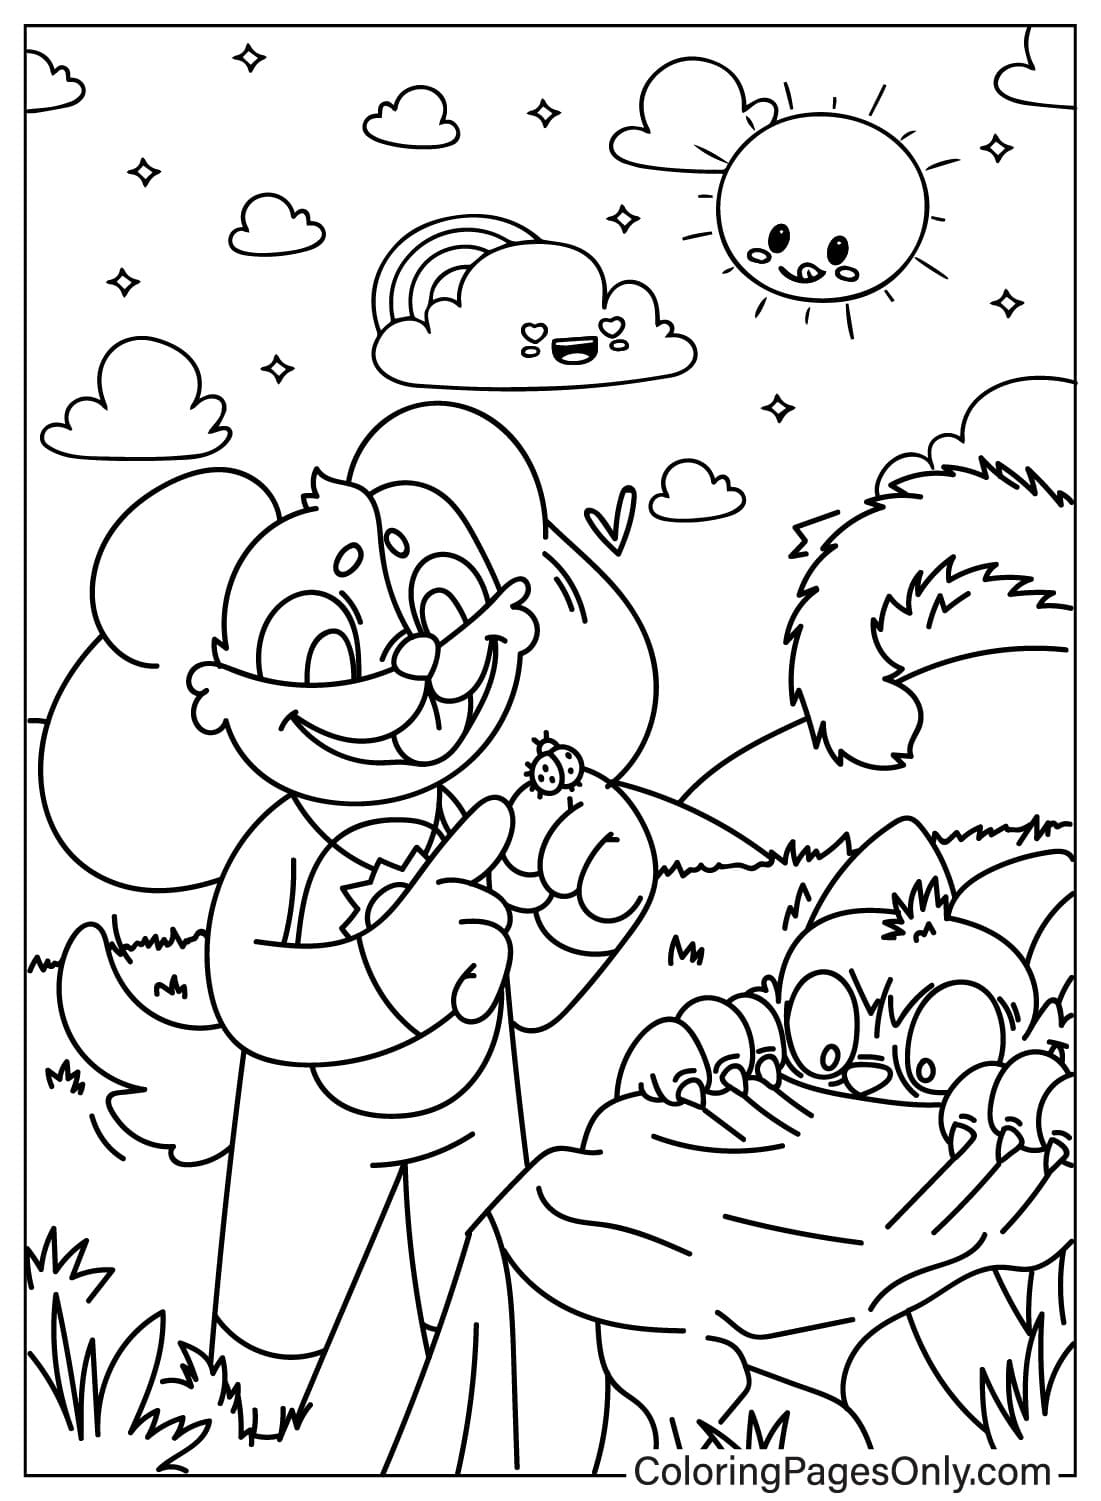 DogDay and CatNap Coloring Book from DogDay